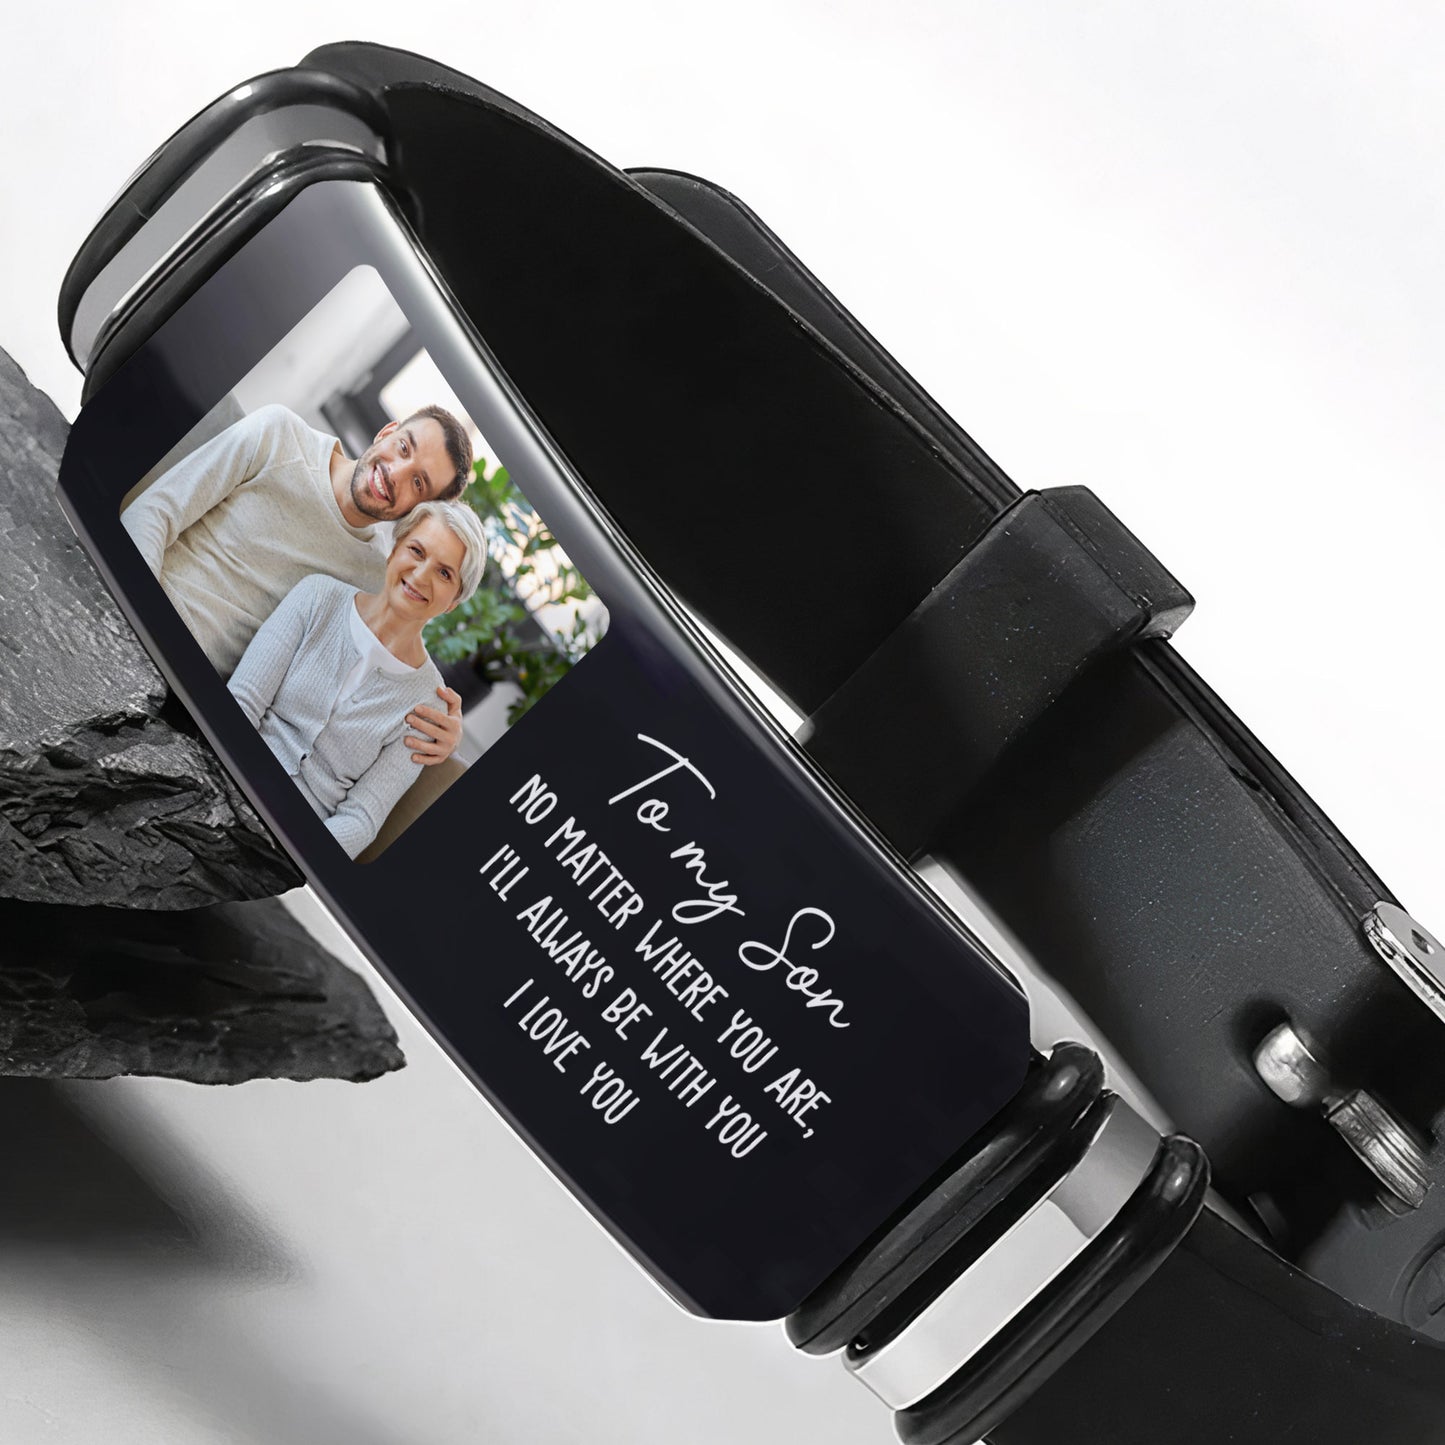 To My Son I'll Always Be With You I Love You - Personalized Photo Bracelet